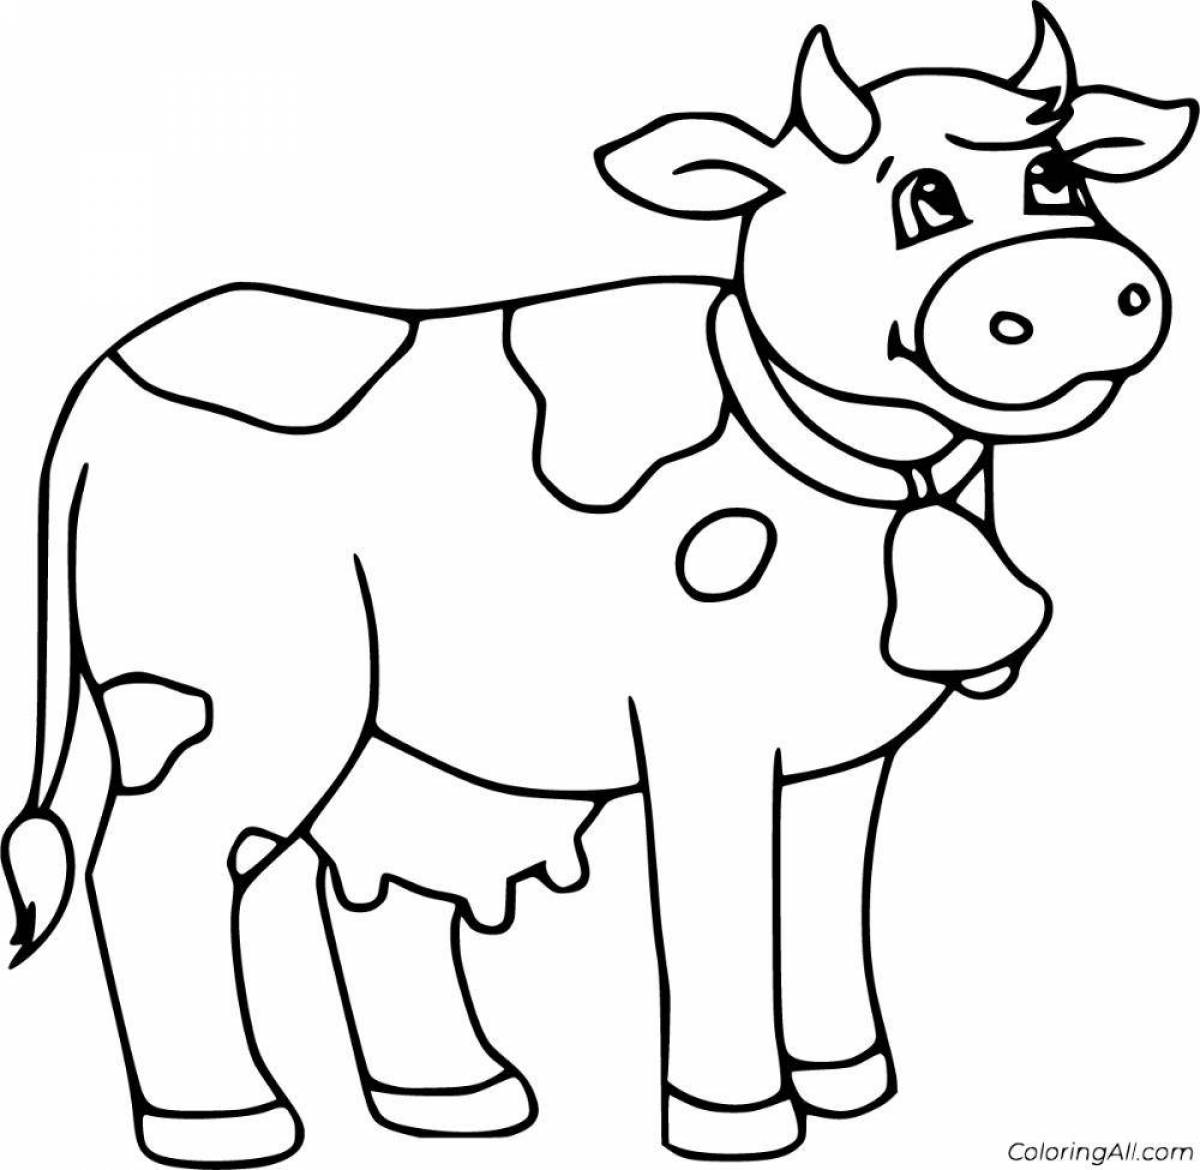 Funny cow coloring for kids